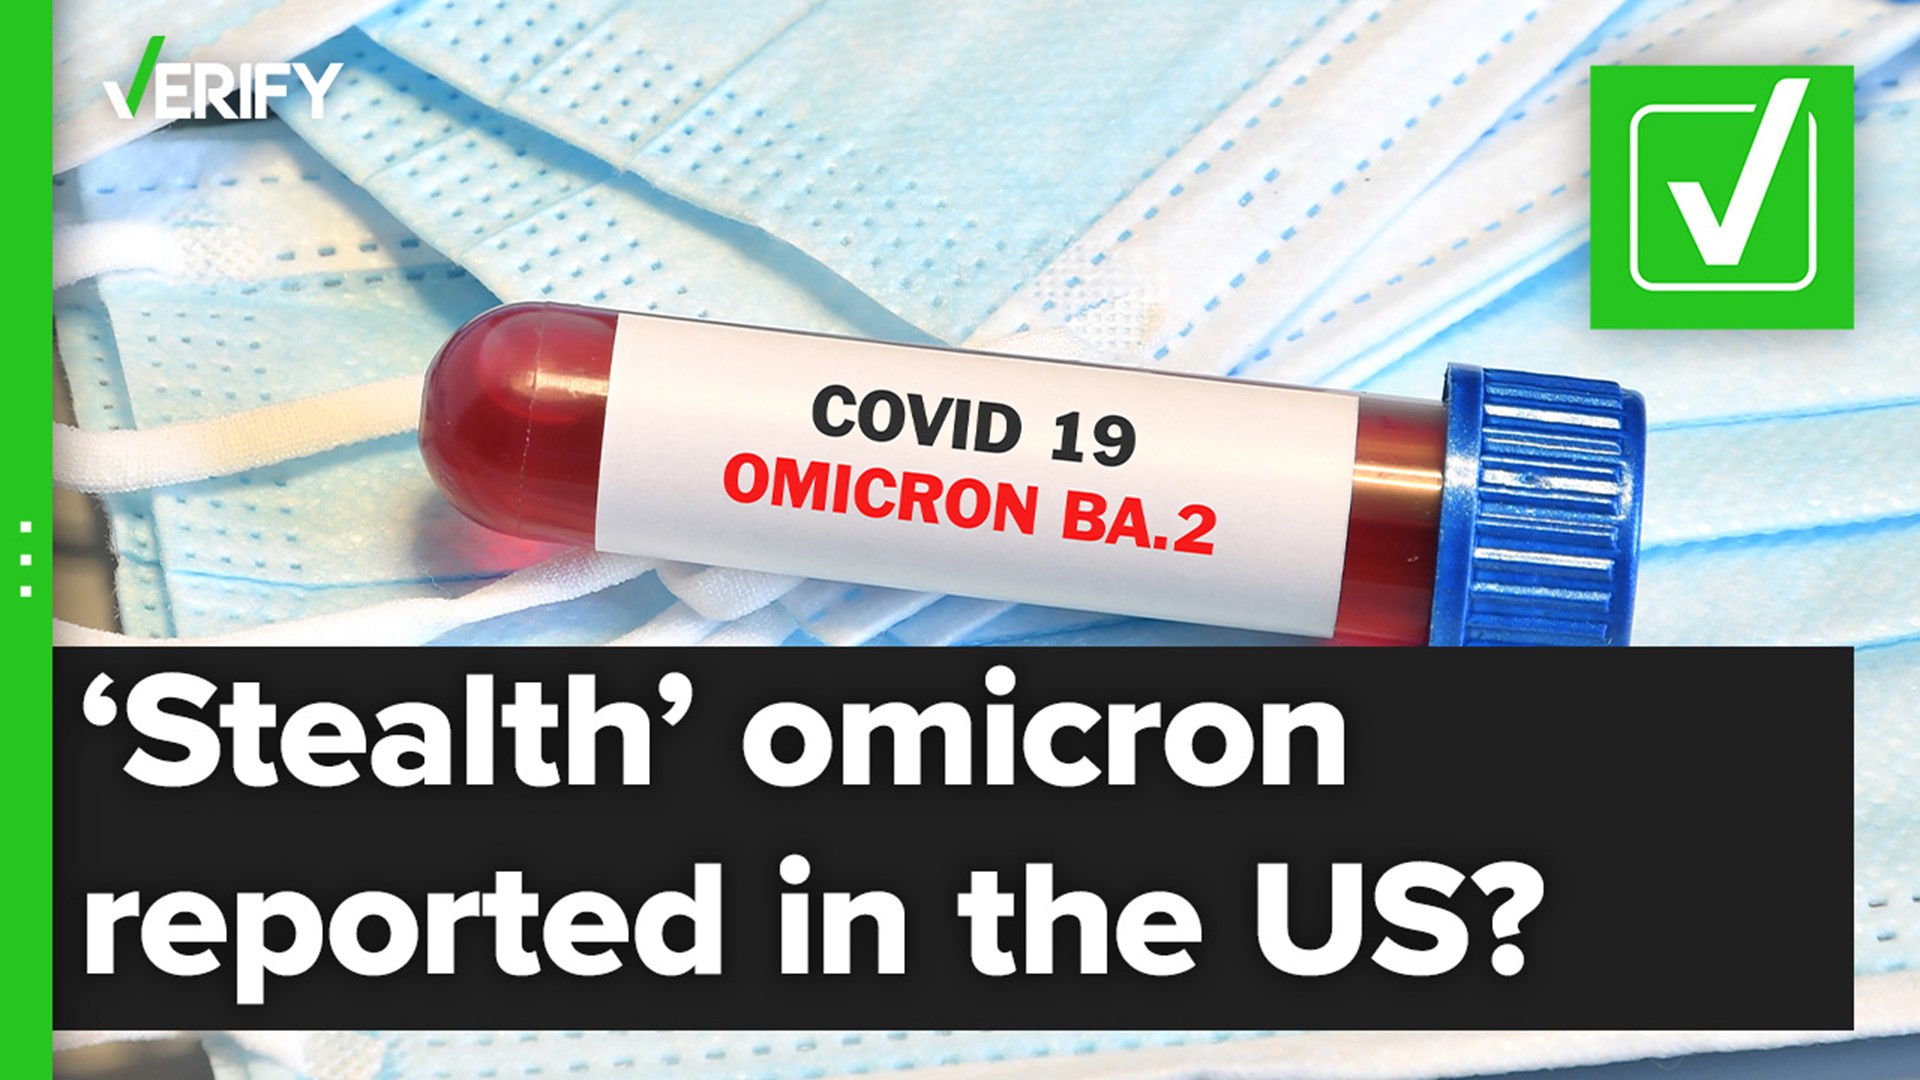 CDC estimates BA.2, informally referred to as “stealth” omicron, accounted for about 23% of COVID-19 cases in the U.S. from March 6-12.